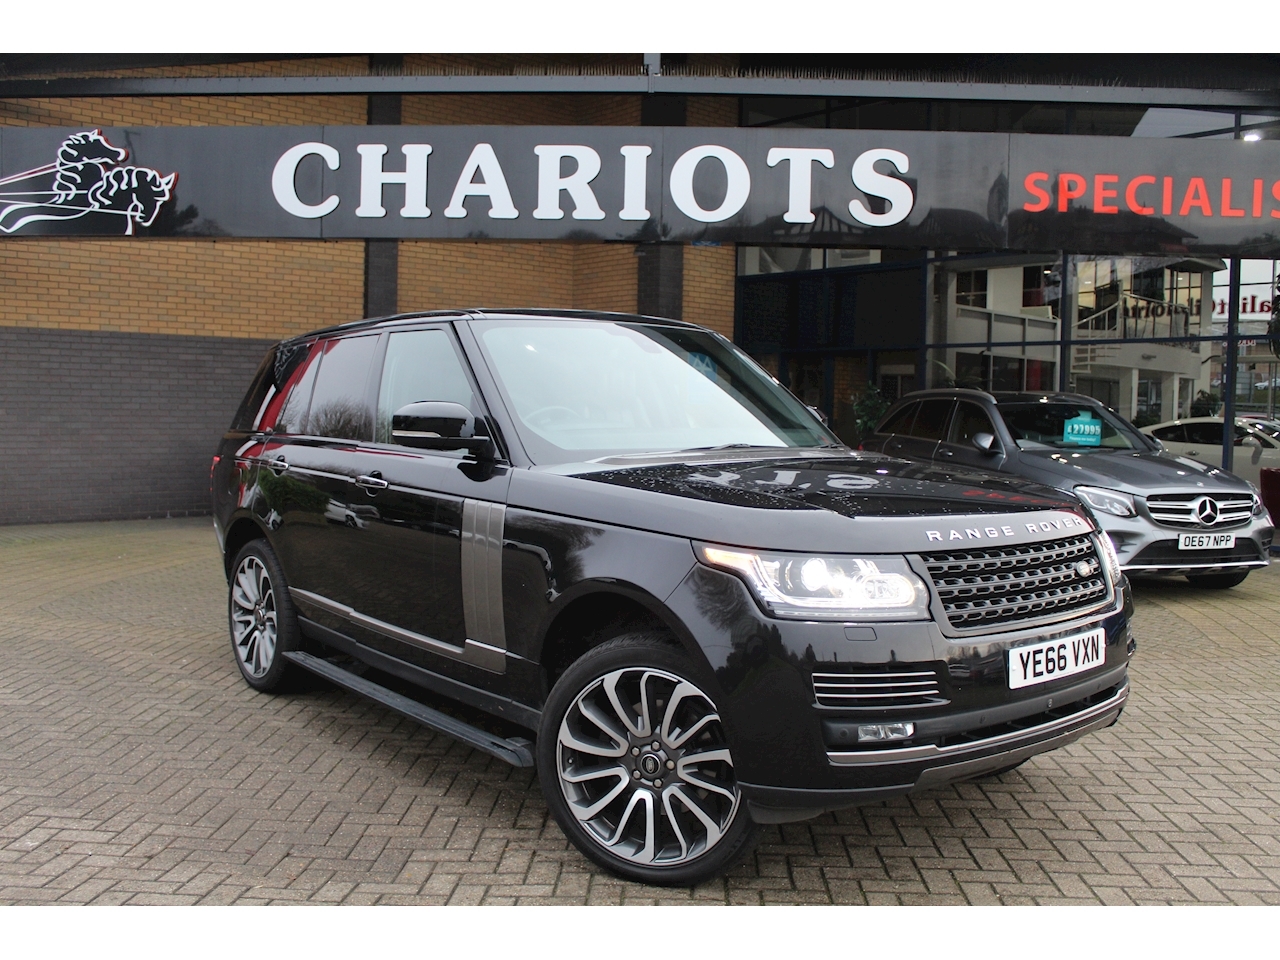 3.0 TD V6 Autobiography SUV 5dr Diesel Auto 4WD (s/s) (258 ps)